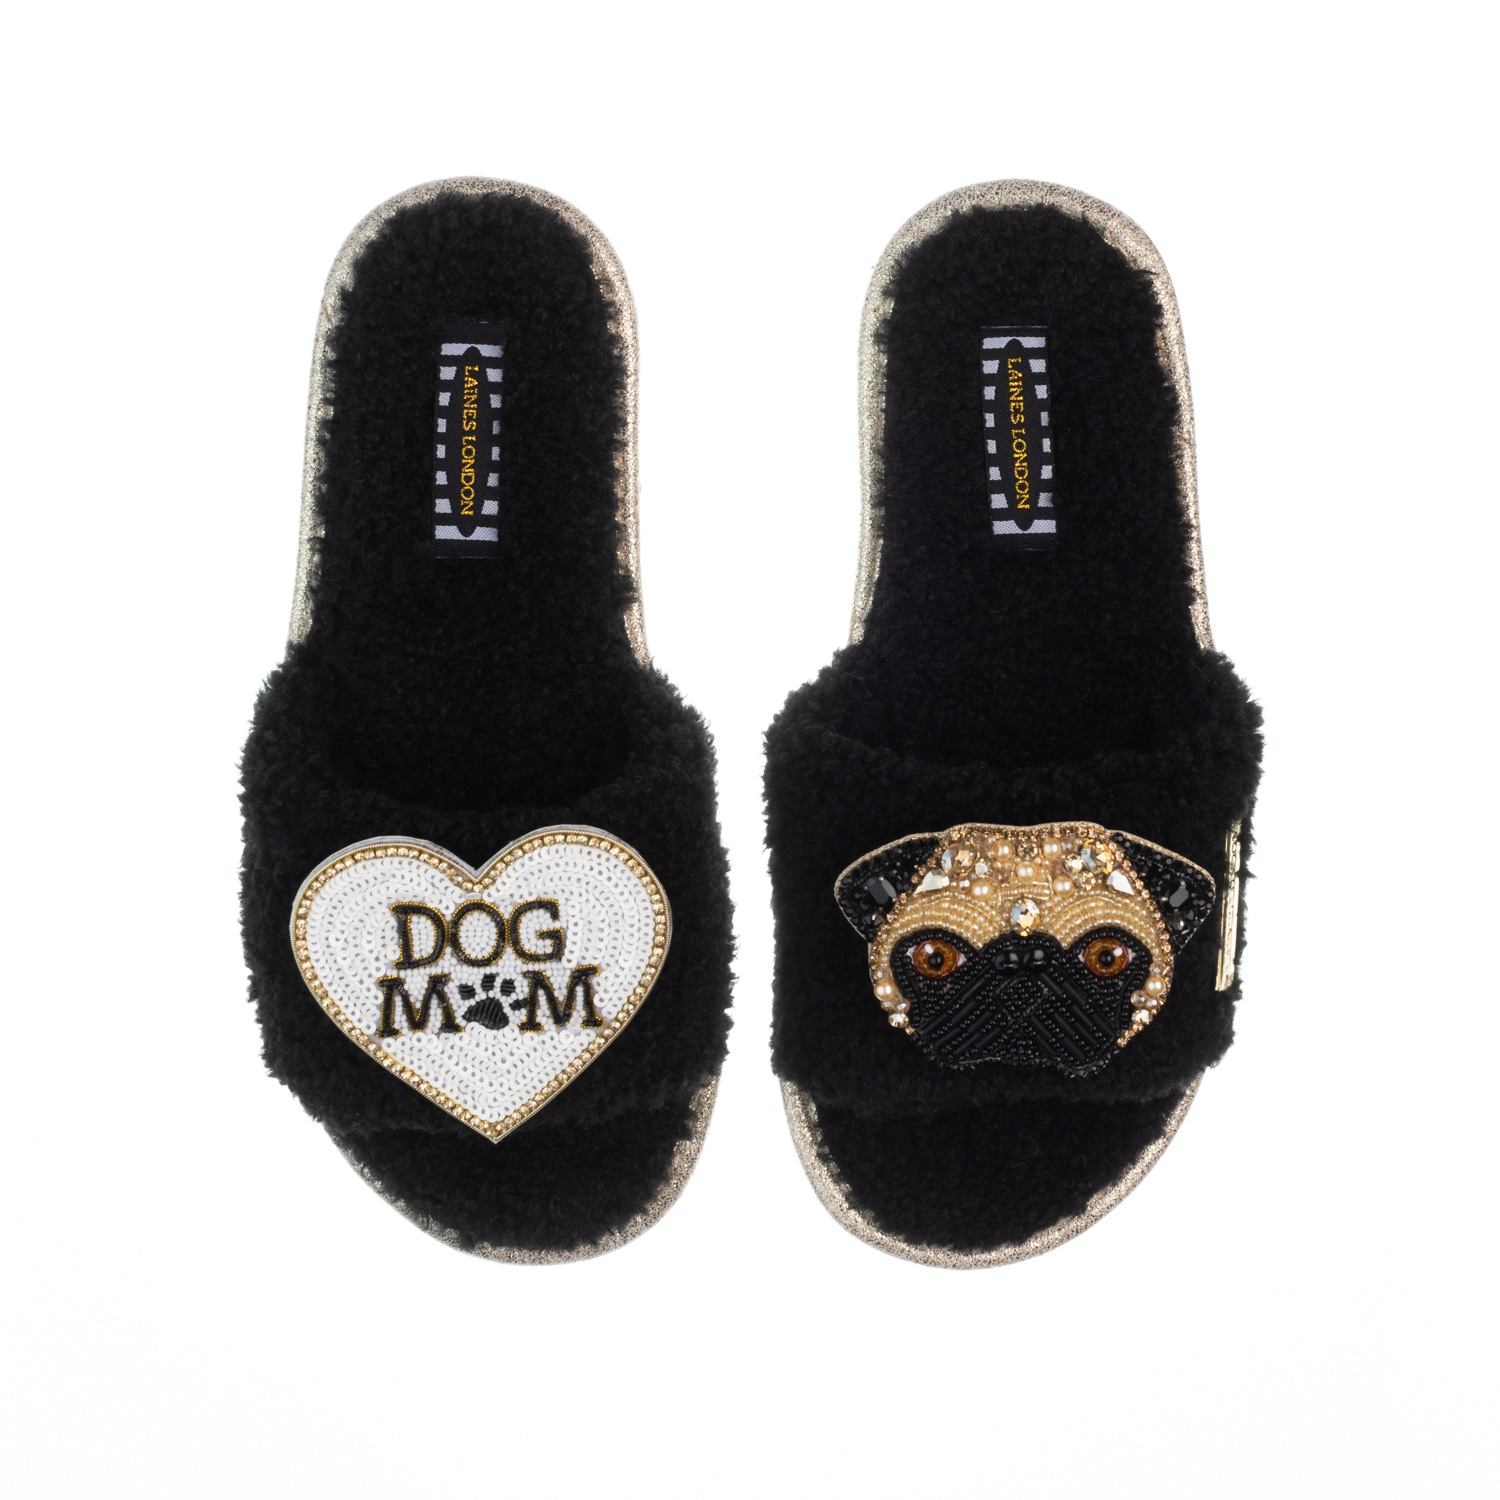 Women’s Teddy Toweling Slippers With Franki Pug & Dog Mum /Mom Brooches - Black Small Laines London